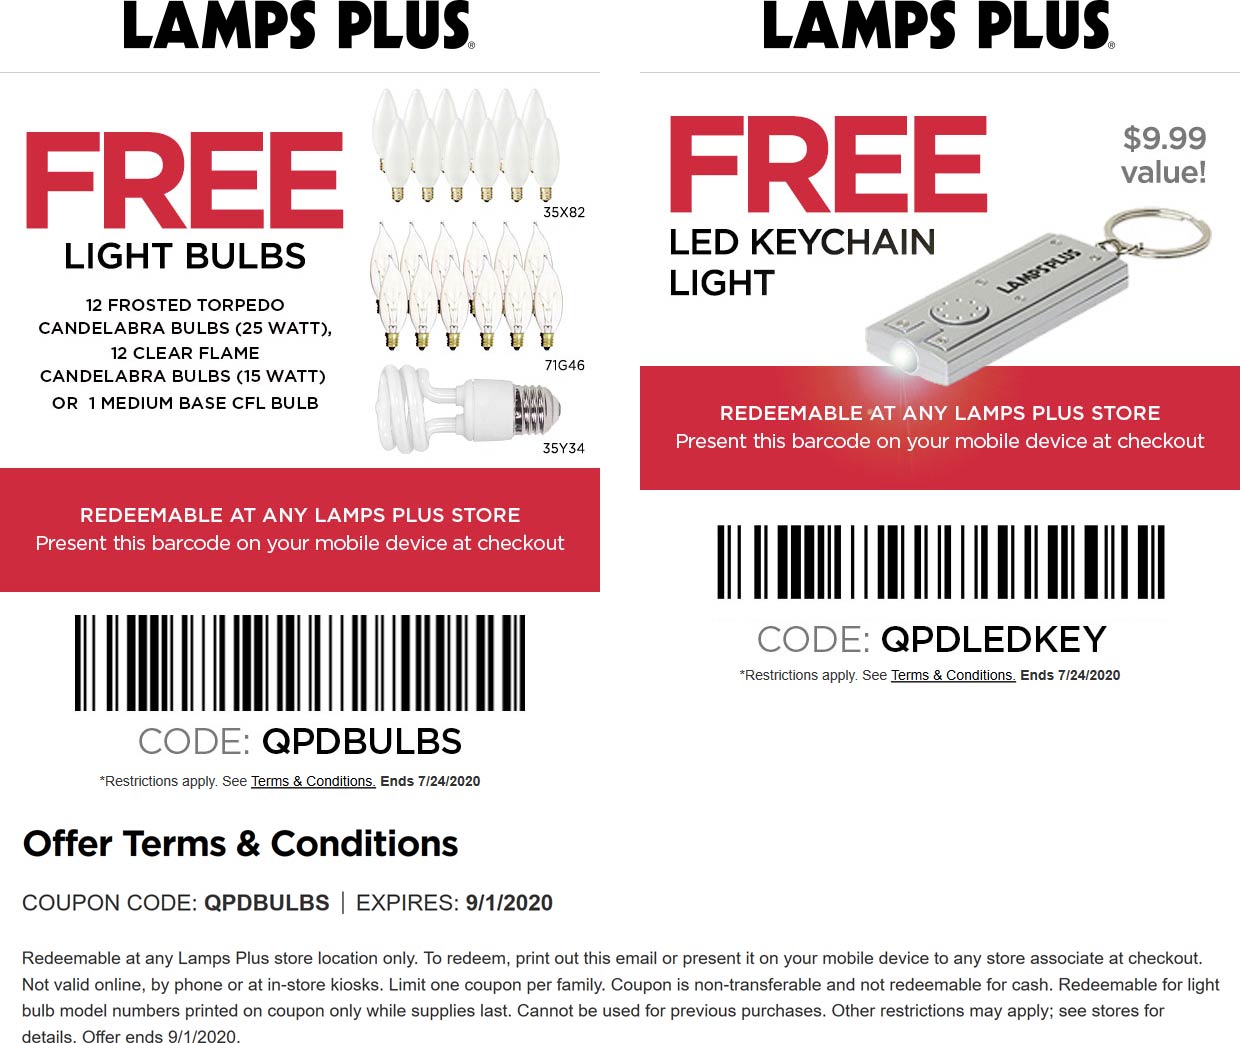 Lamps Plus stores Coupon  Free light bulbs or LED keychain at Lamps Plus #lampsplus